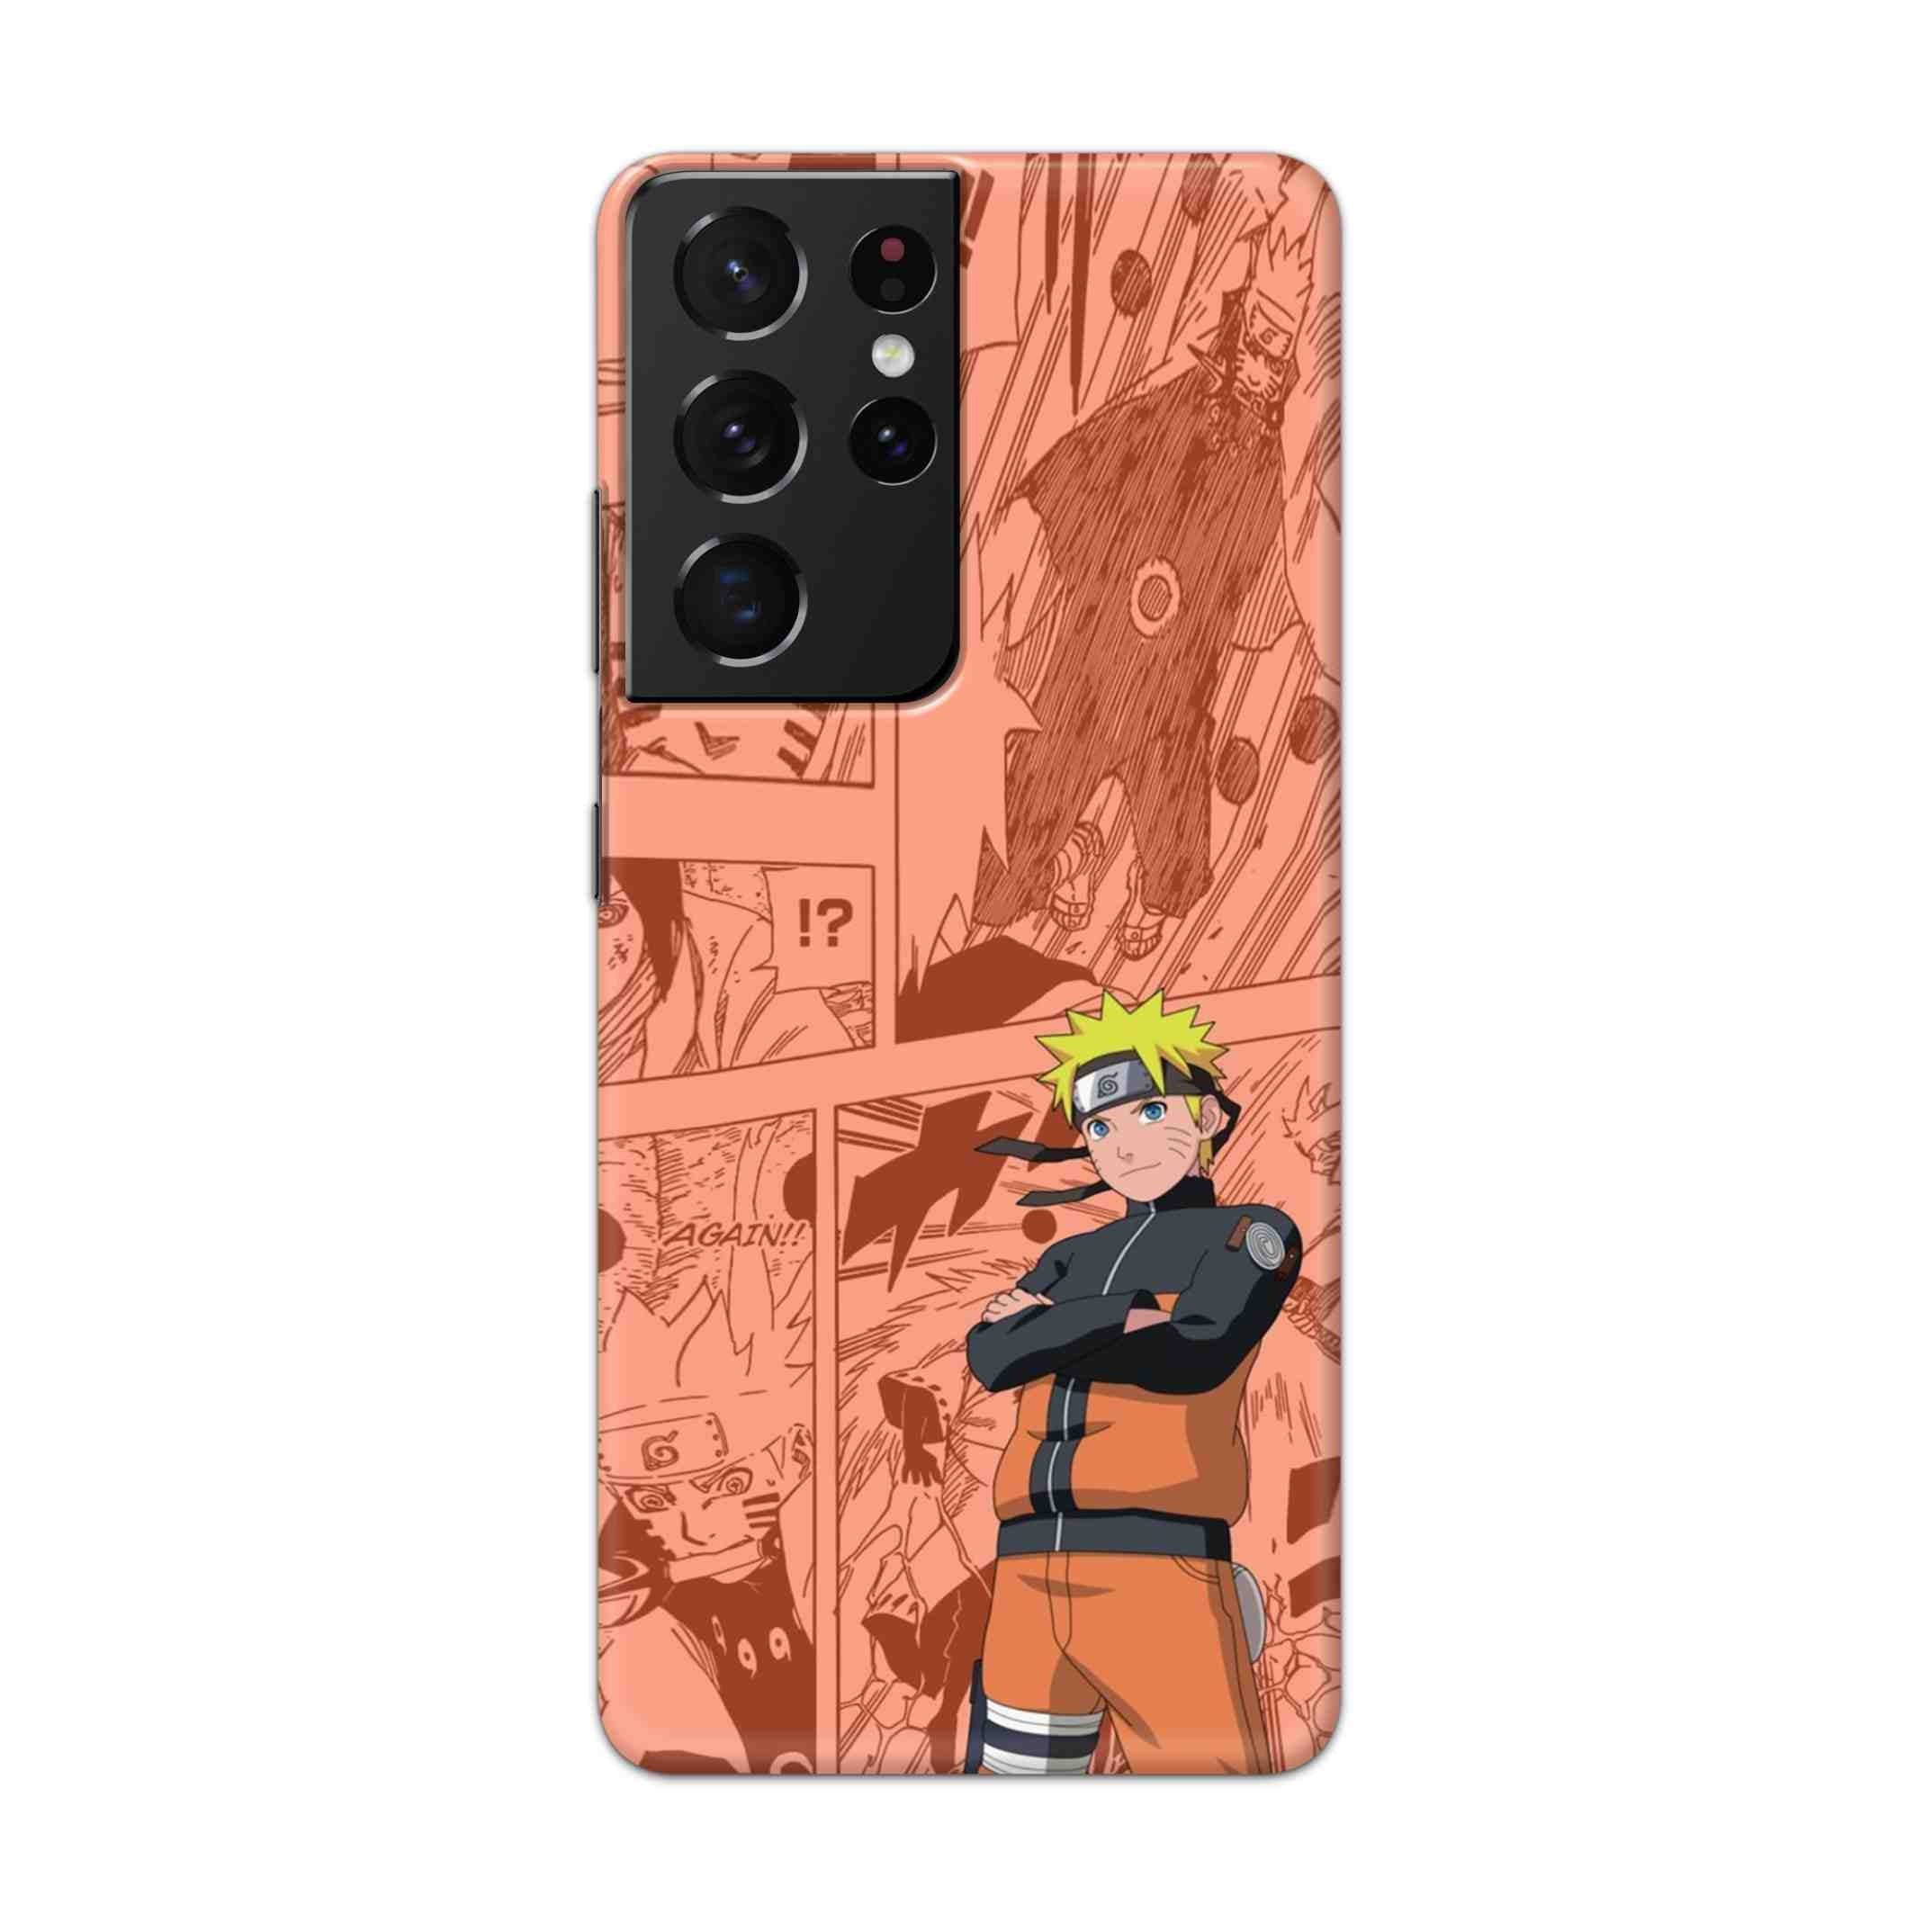 Buy Naruto Hard Back Mobile Phone Case Cover For Samsung Galaxy S21 Ultra Online